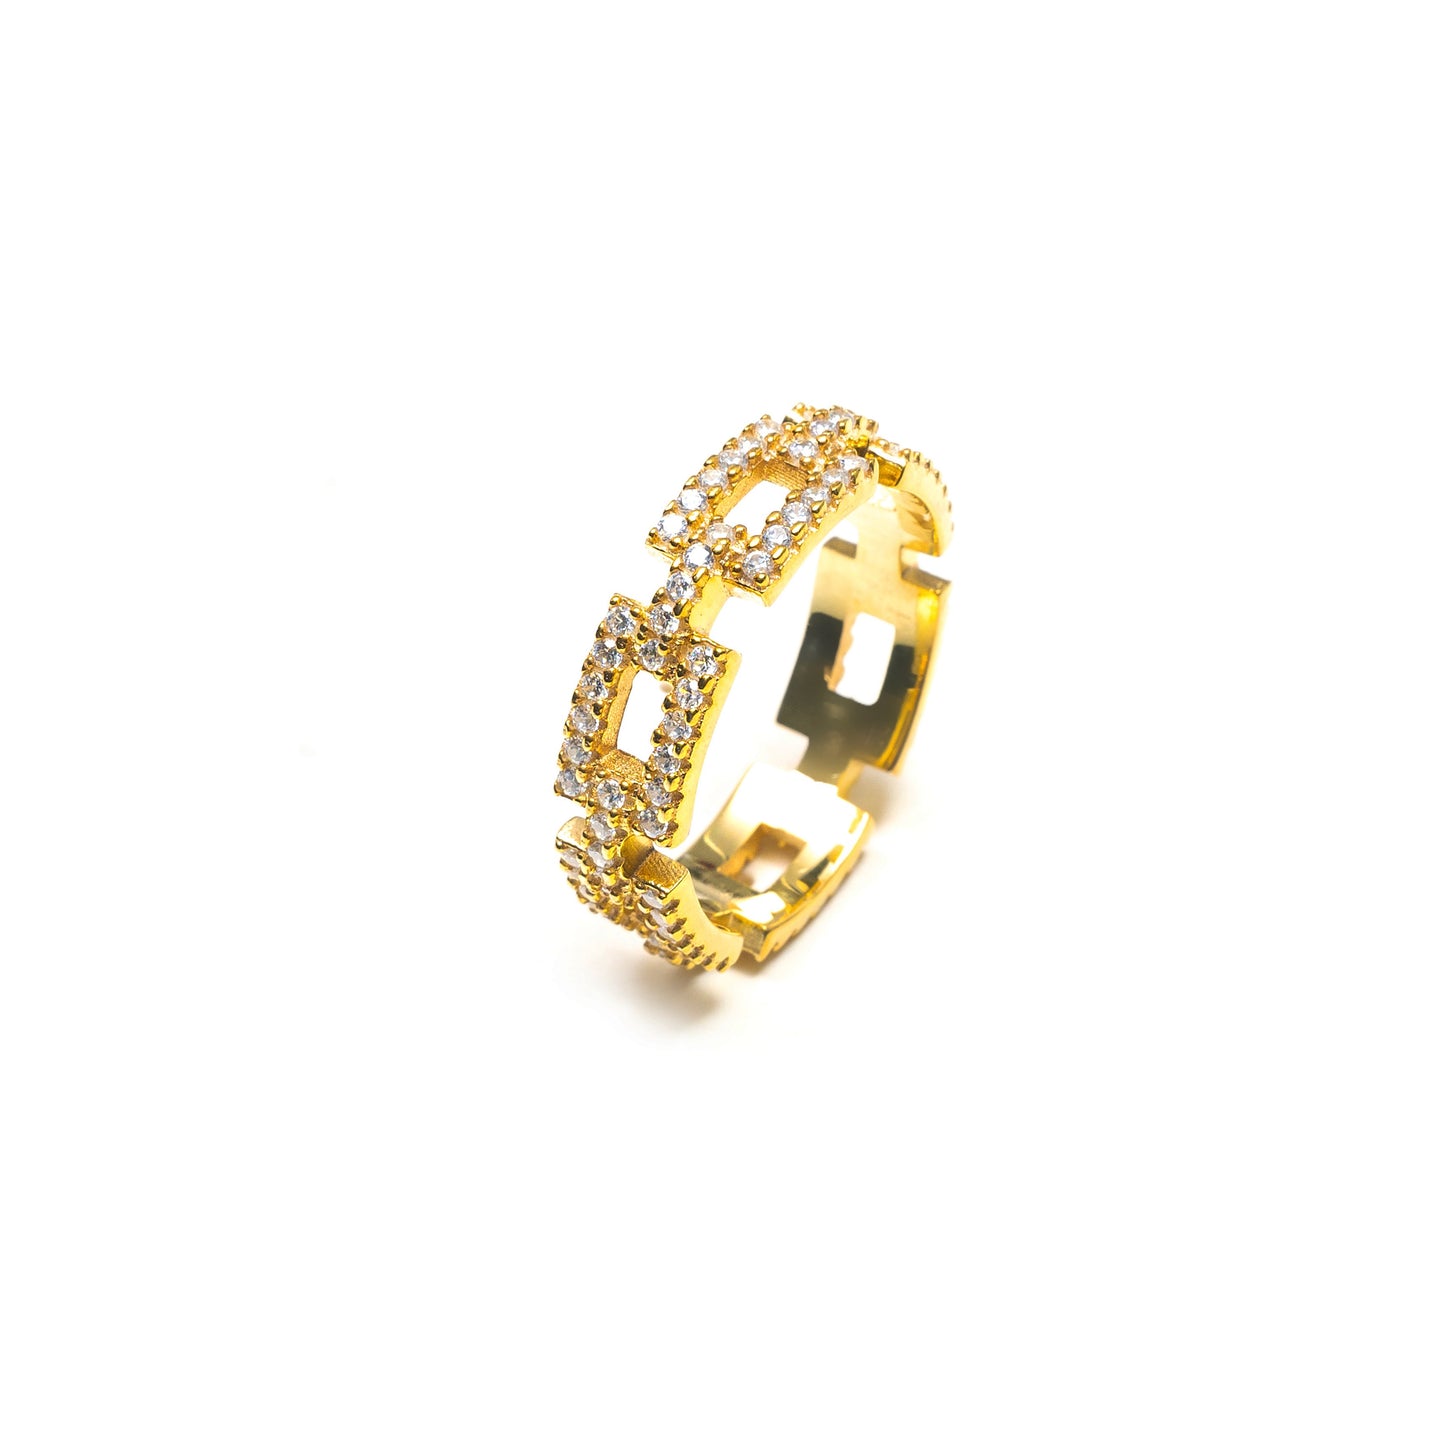 PAVE CHAIN LINK RING